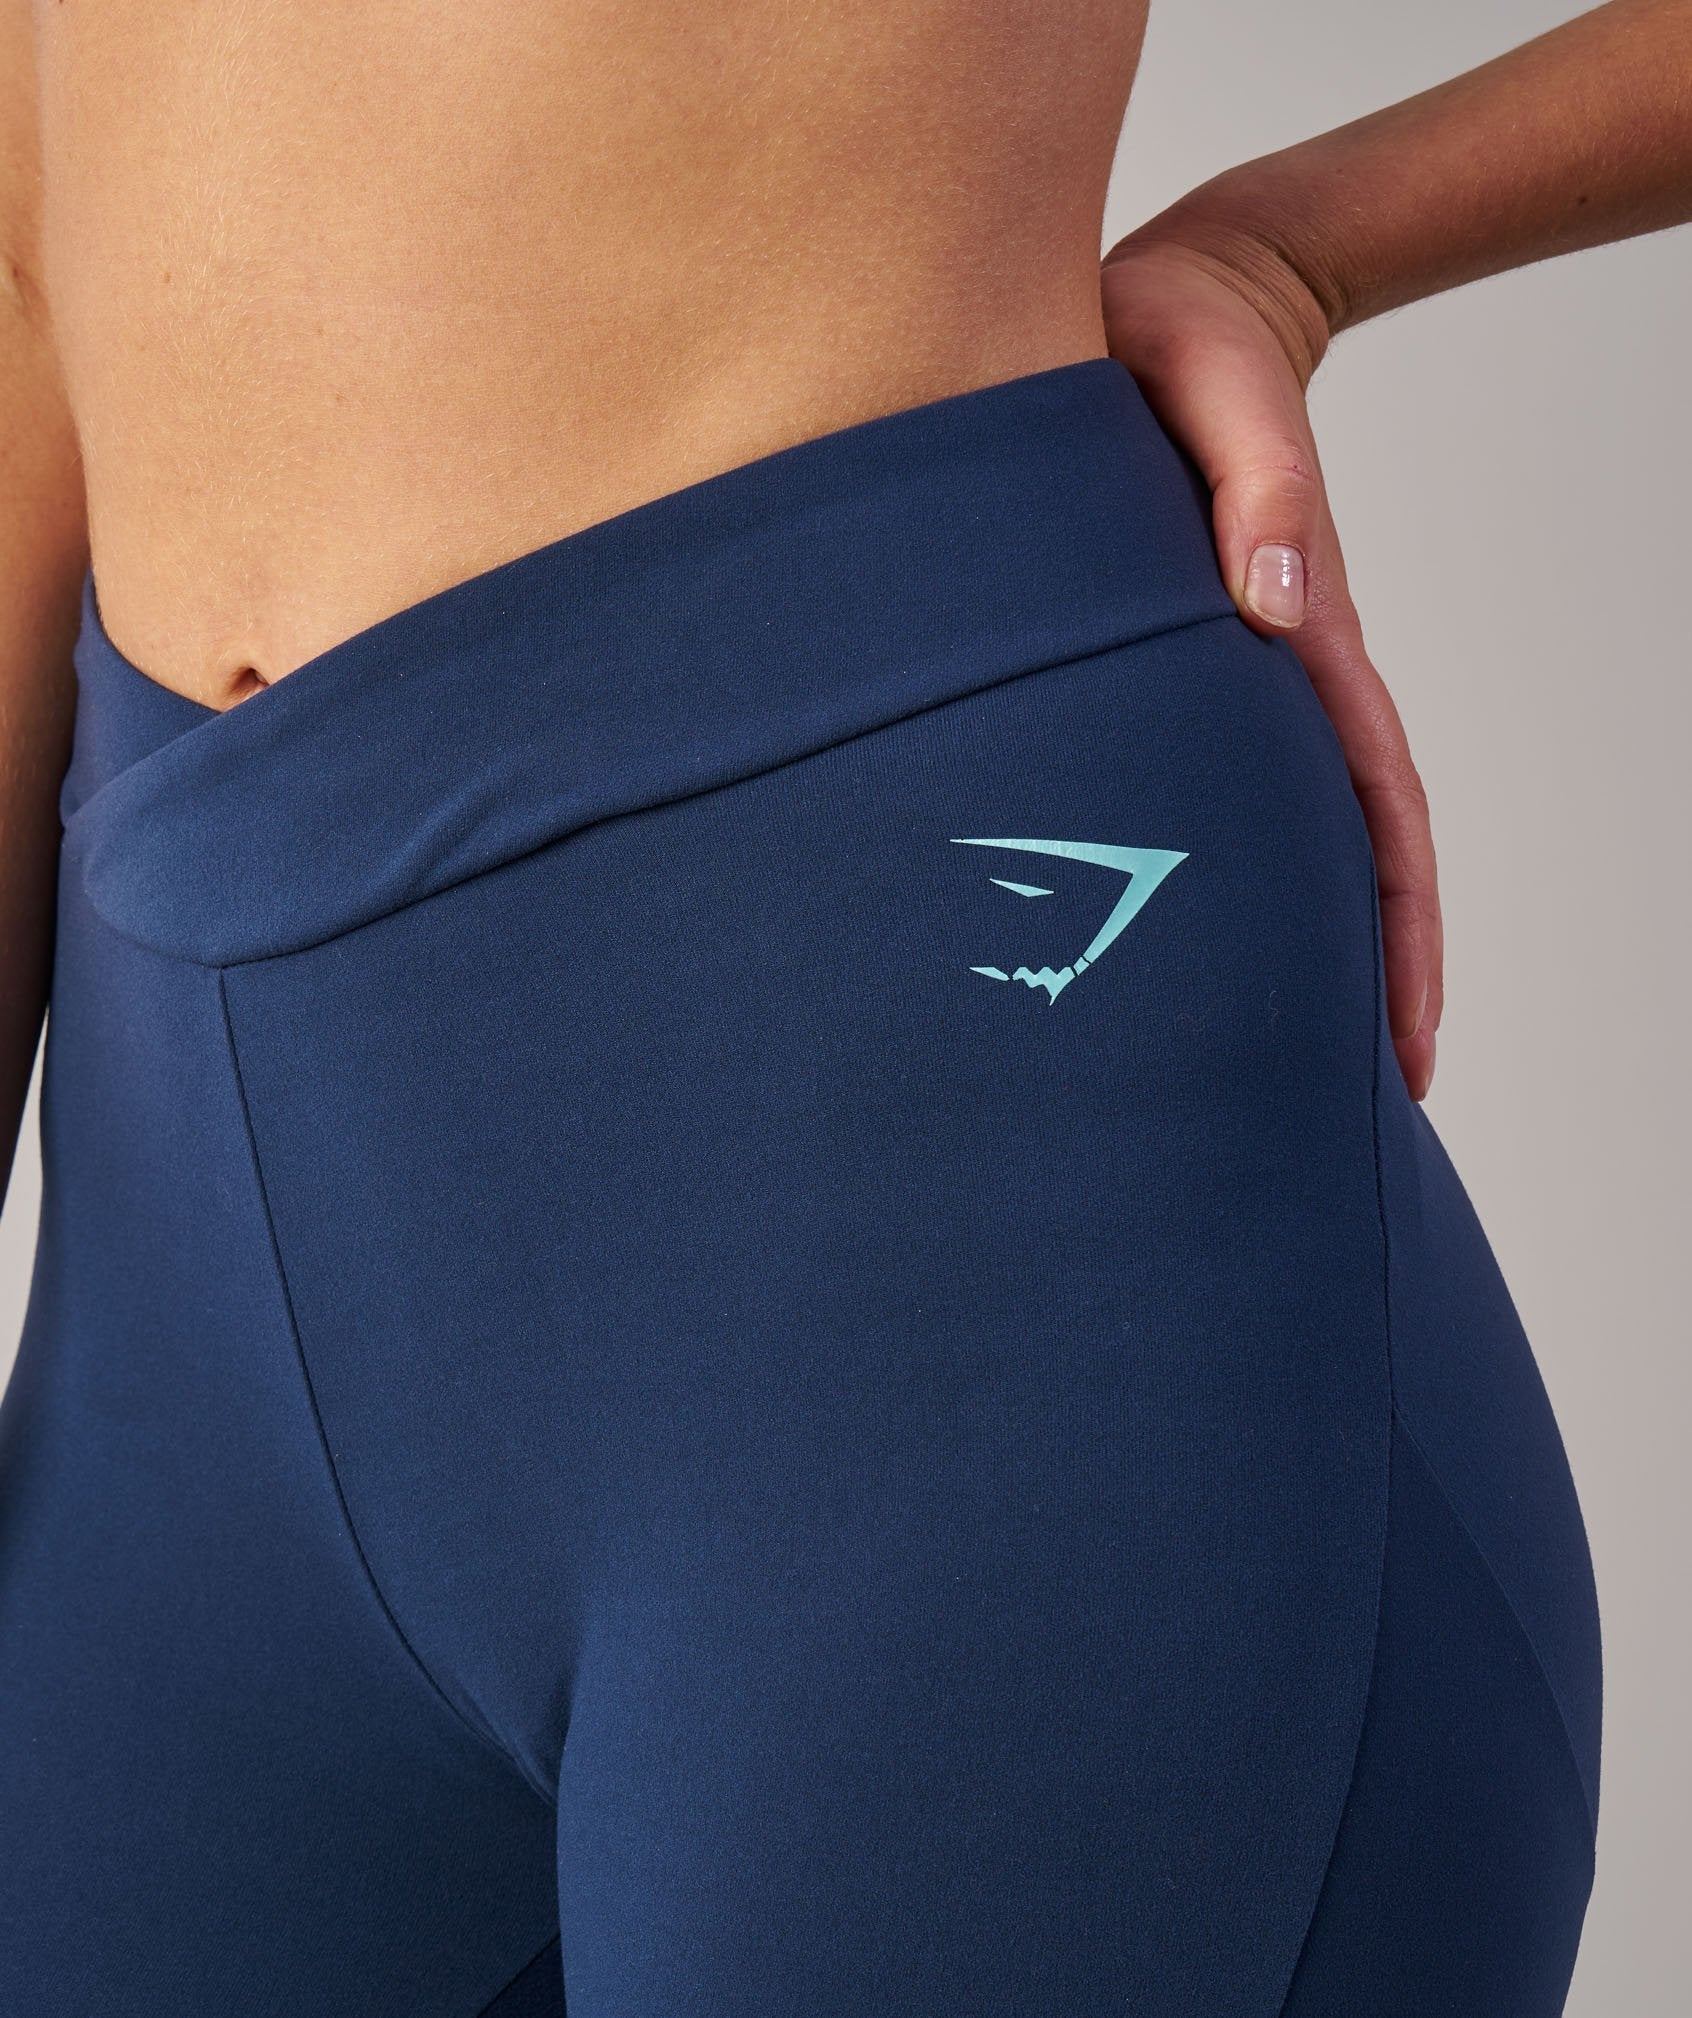 TwoTone Leggings in Sapphire Blue Marl/Pale Turquoise Marl - view 5